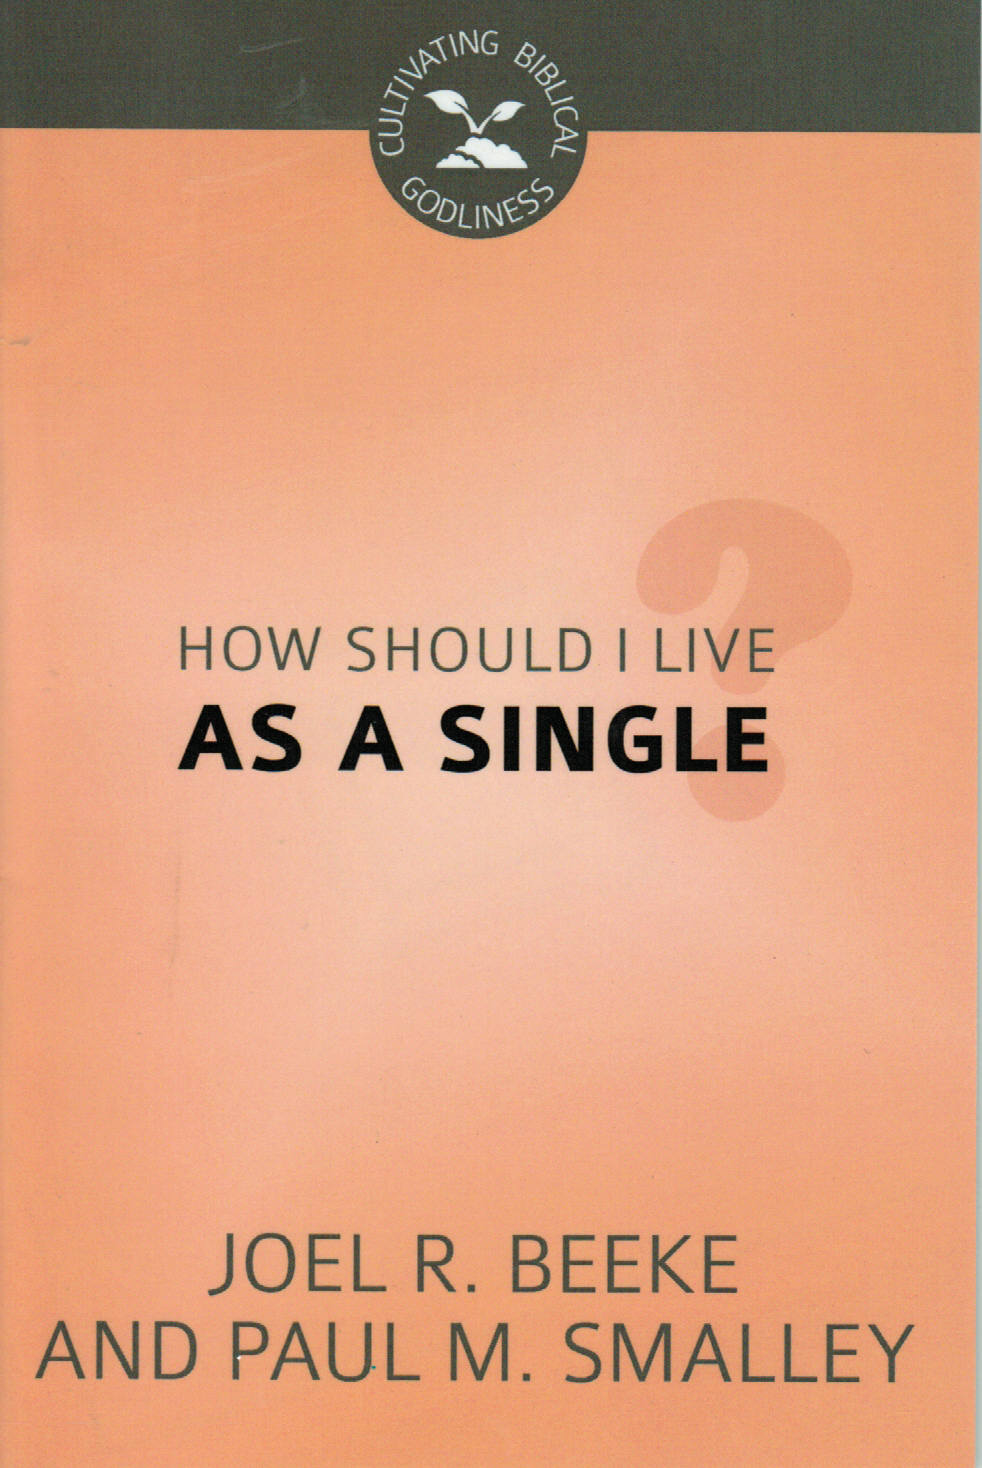 Cultivating Biblical Godliness - How Should I live as a Single?